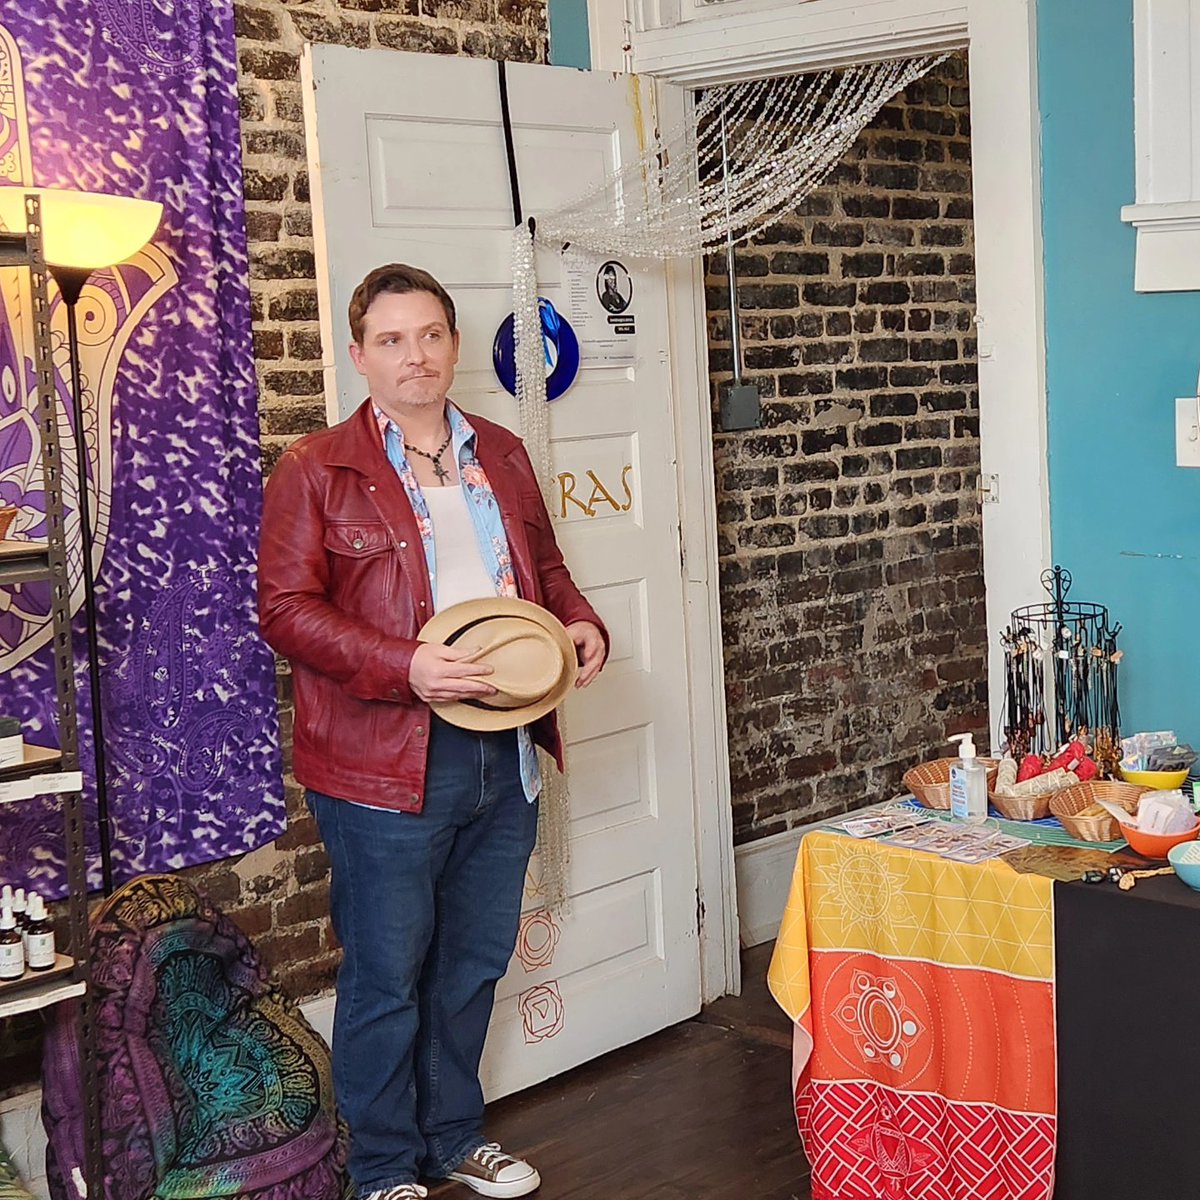 Thanks to Ashakras in downtown Mobile for letting us use their cool shop for a filming location this weekend!

#ashakras #downtownmobile #mobileal #filmmaking #indiefilm #metaphysical #palmistry #paranormal #gulfcoast